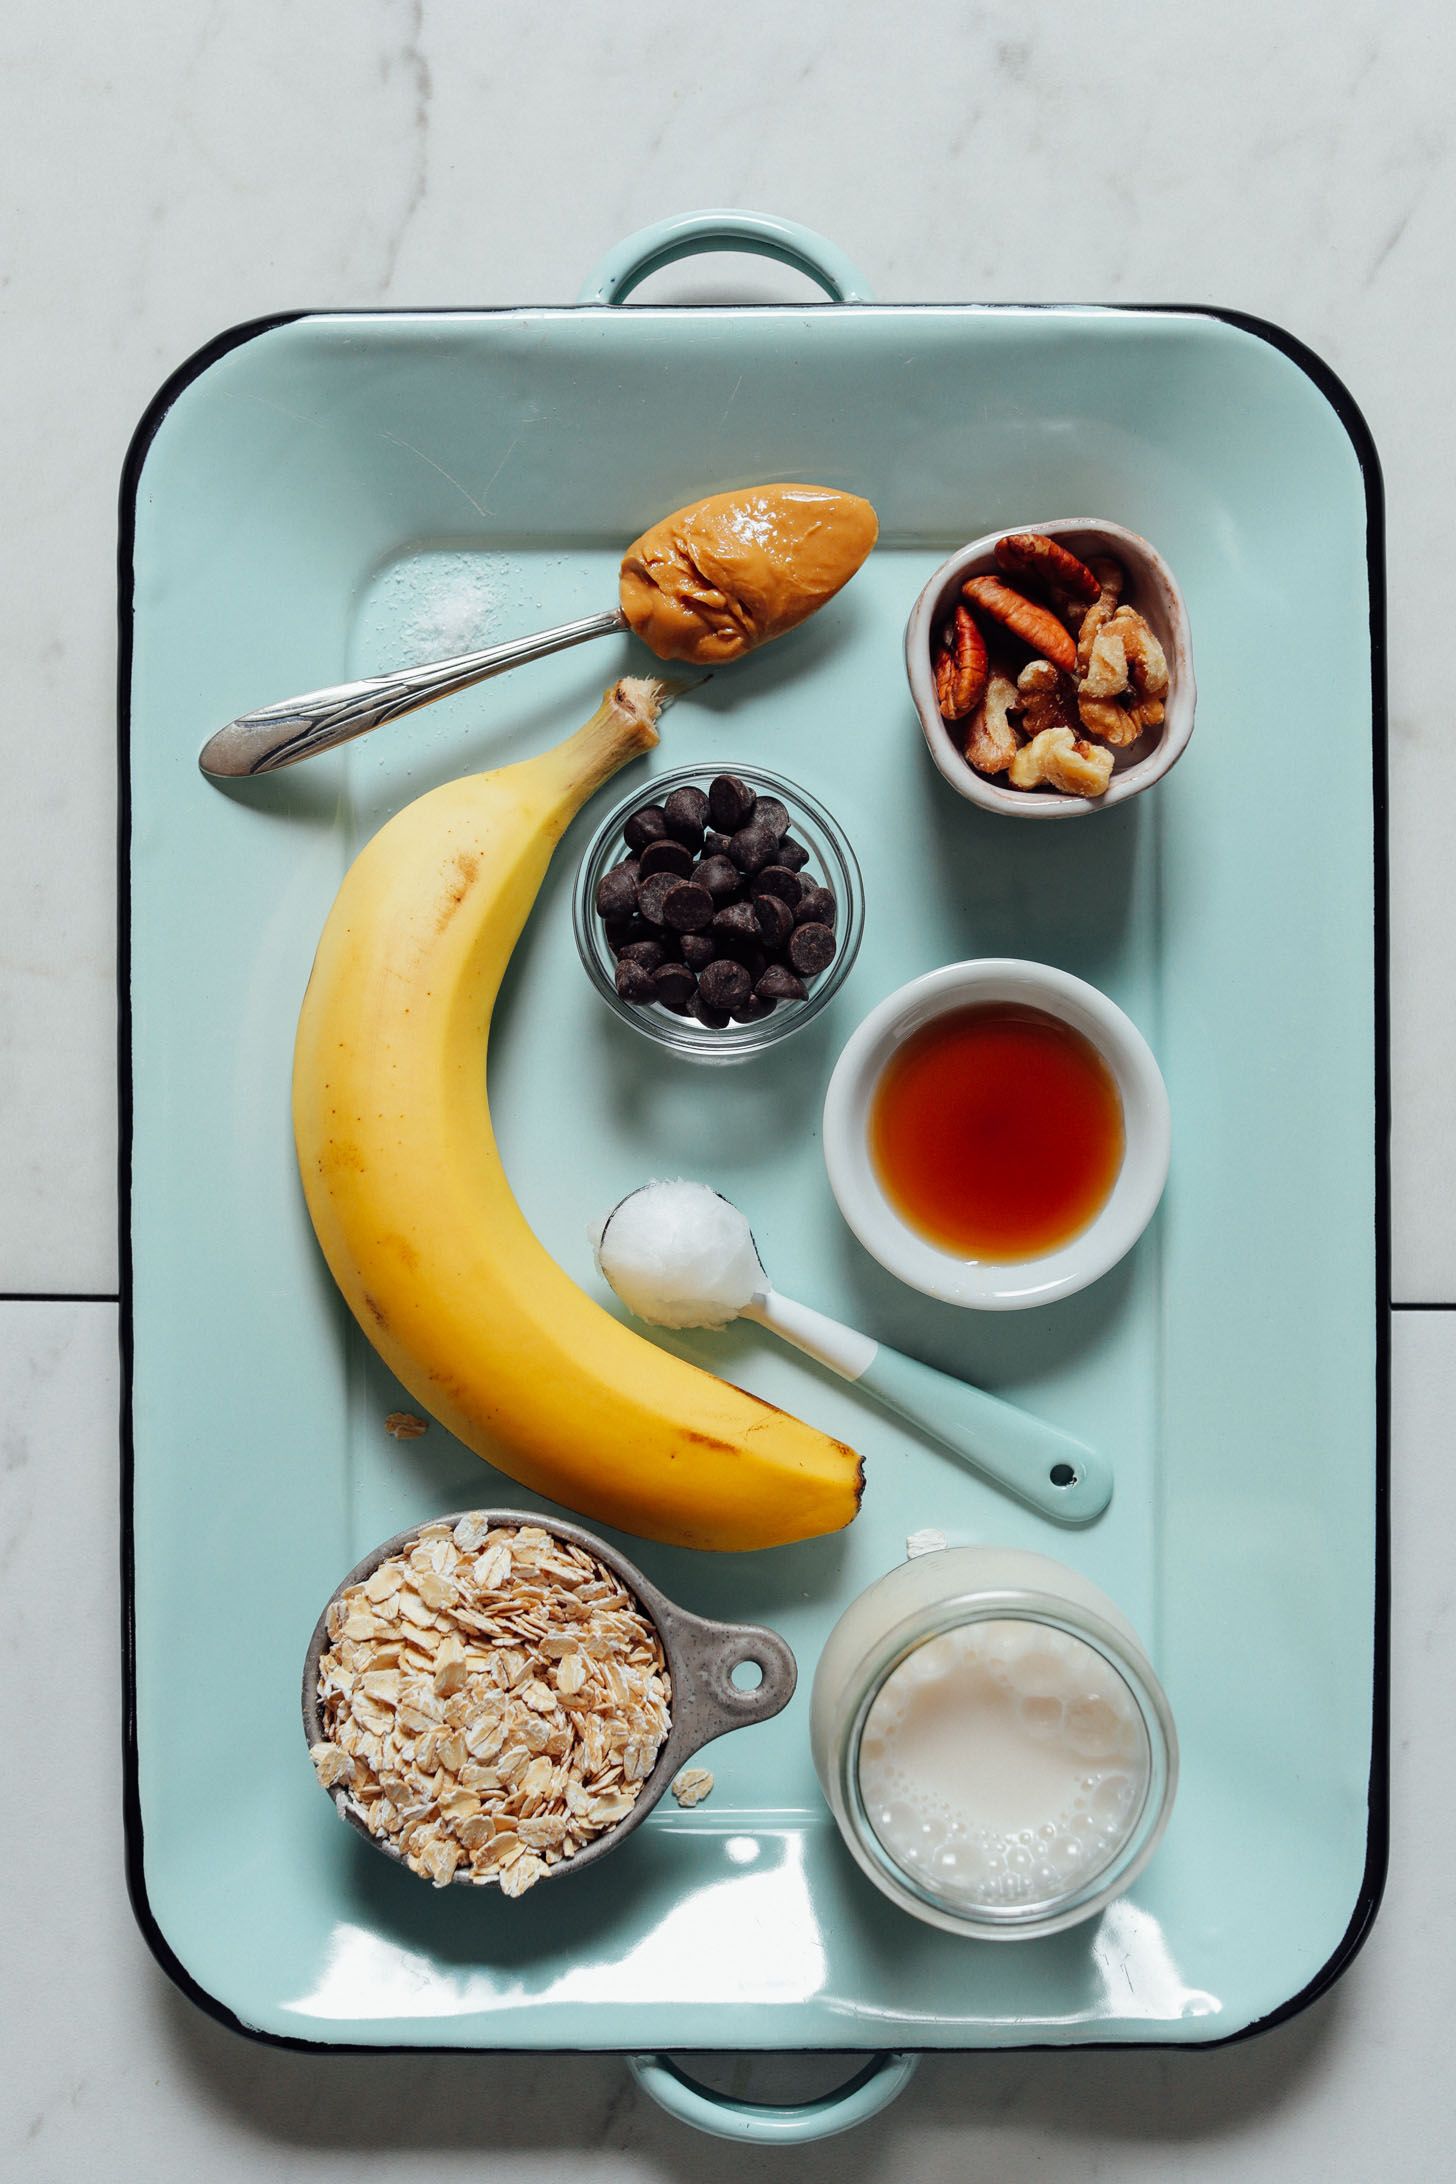 Overhead image of banana baked oatmeal ingredients on a blue tray, including oats, banana, and chocolate